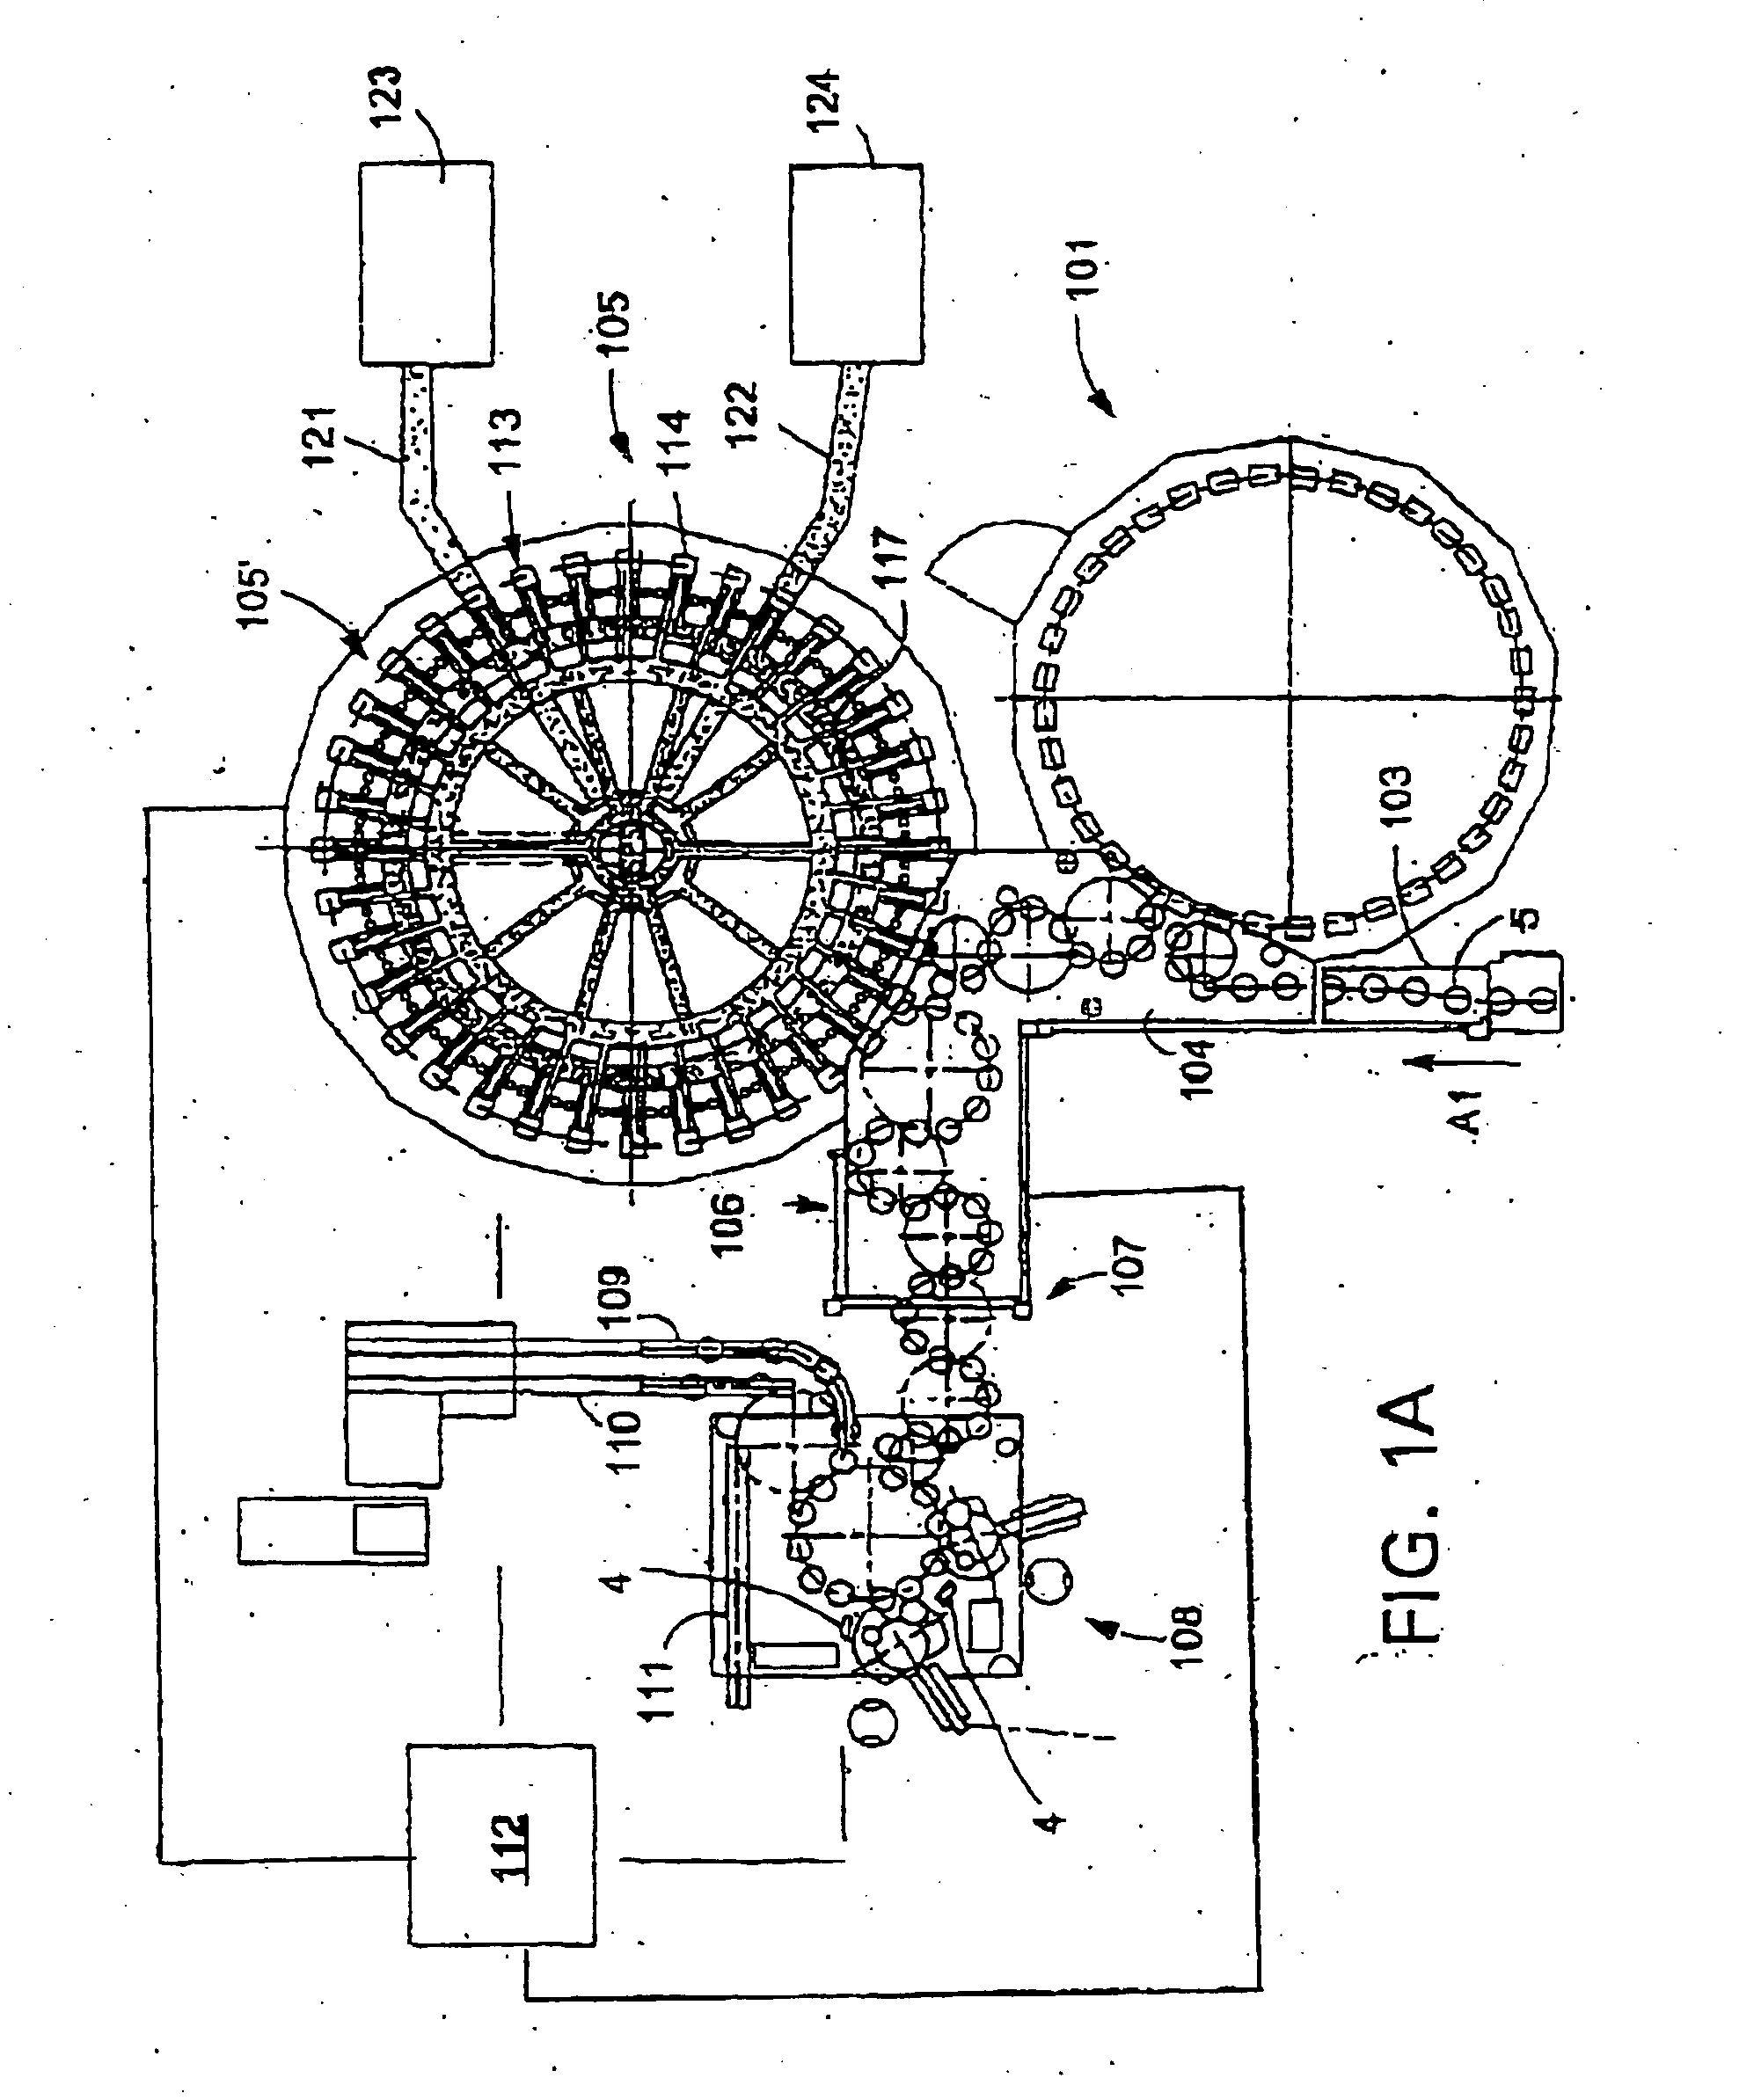 Beverage bottling plant for filling bottles with a liquid beverage filling material, having an apparatus for exchanging operating units disposed at rotating container handling machines